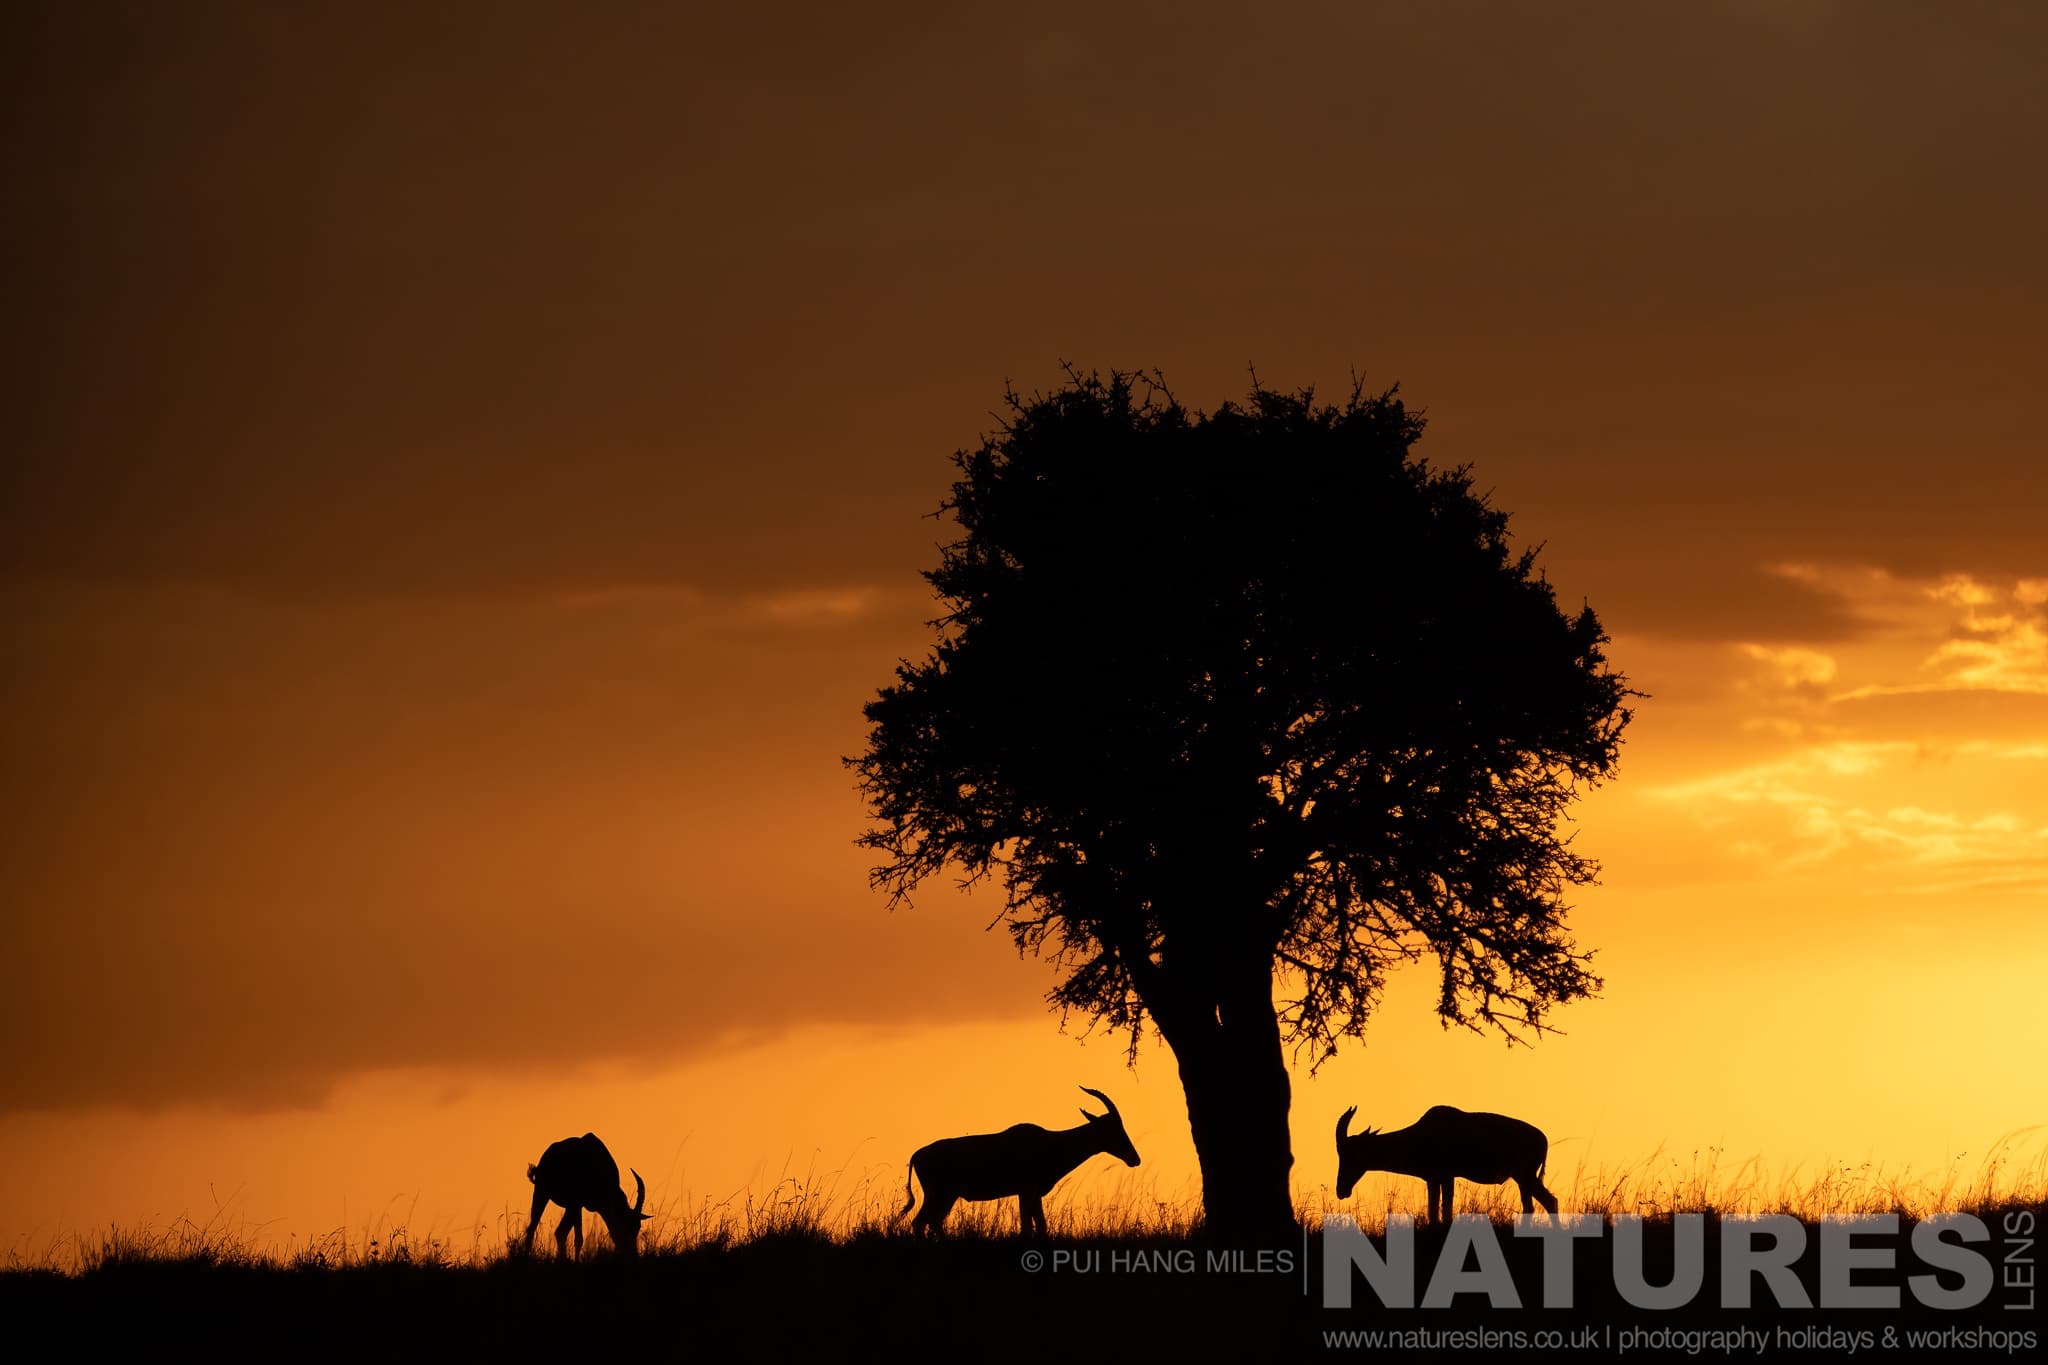 A Group Of Topi Around A Tree All Silhouetted At Sunrise Photographed At The Locations Used For The Ultimate African Wildlife Photography Holiday